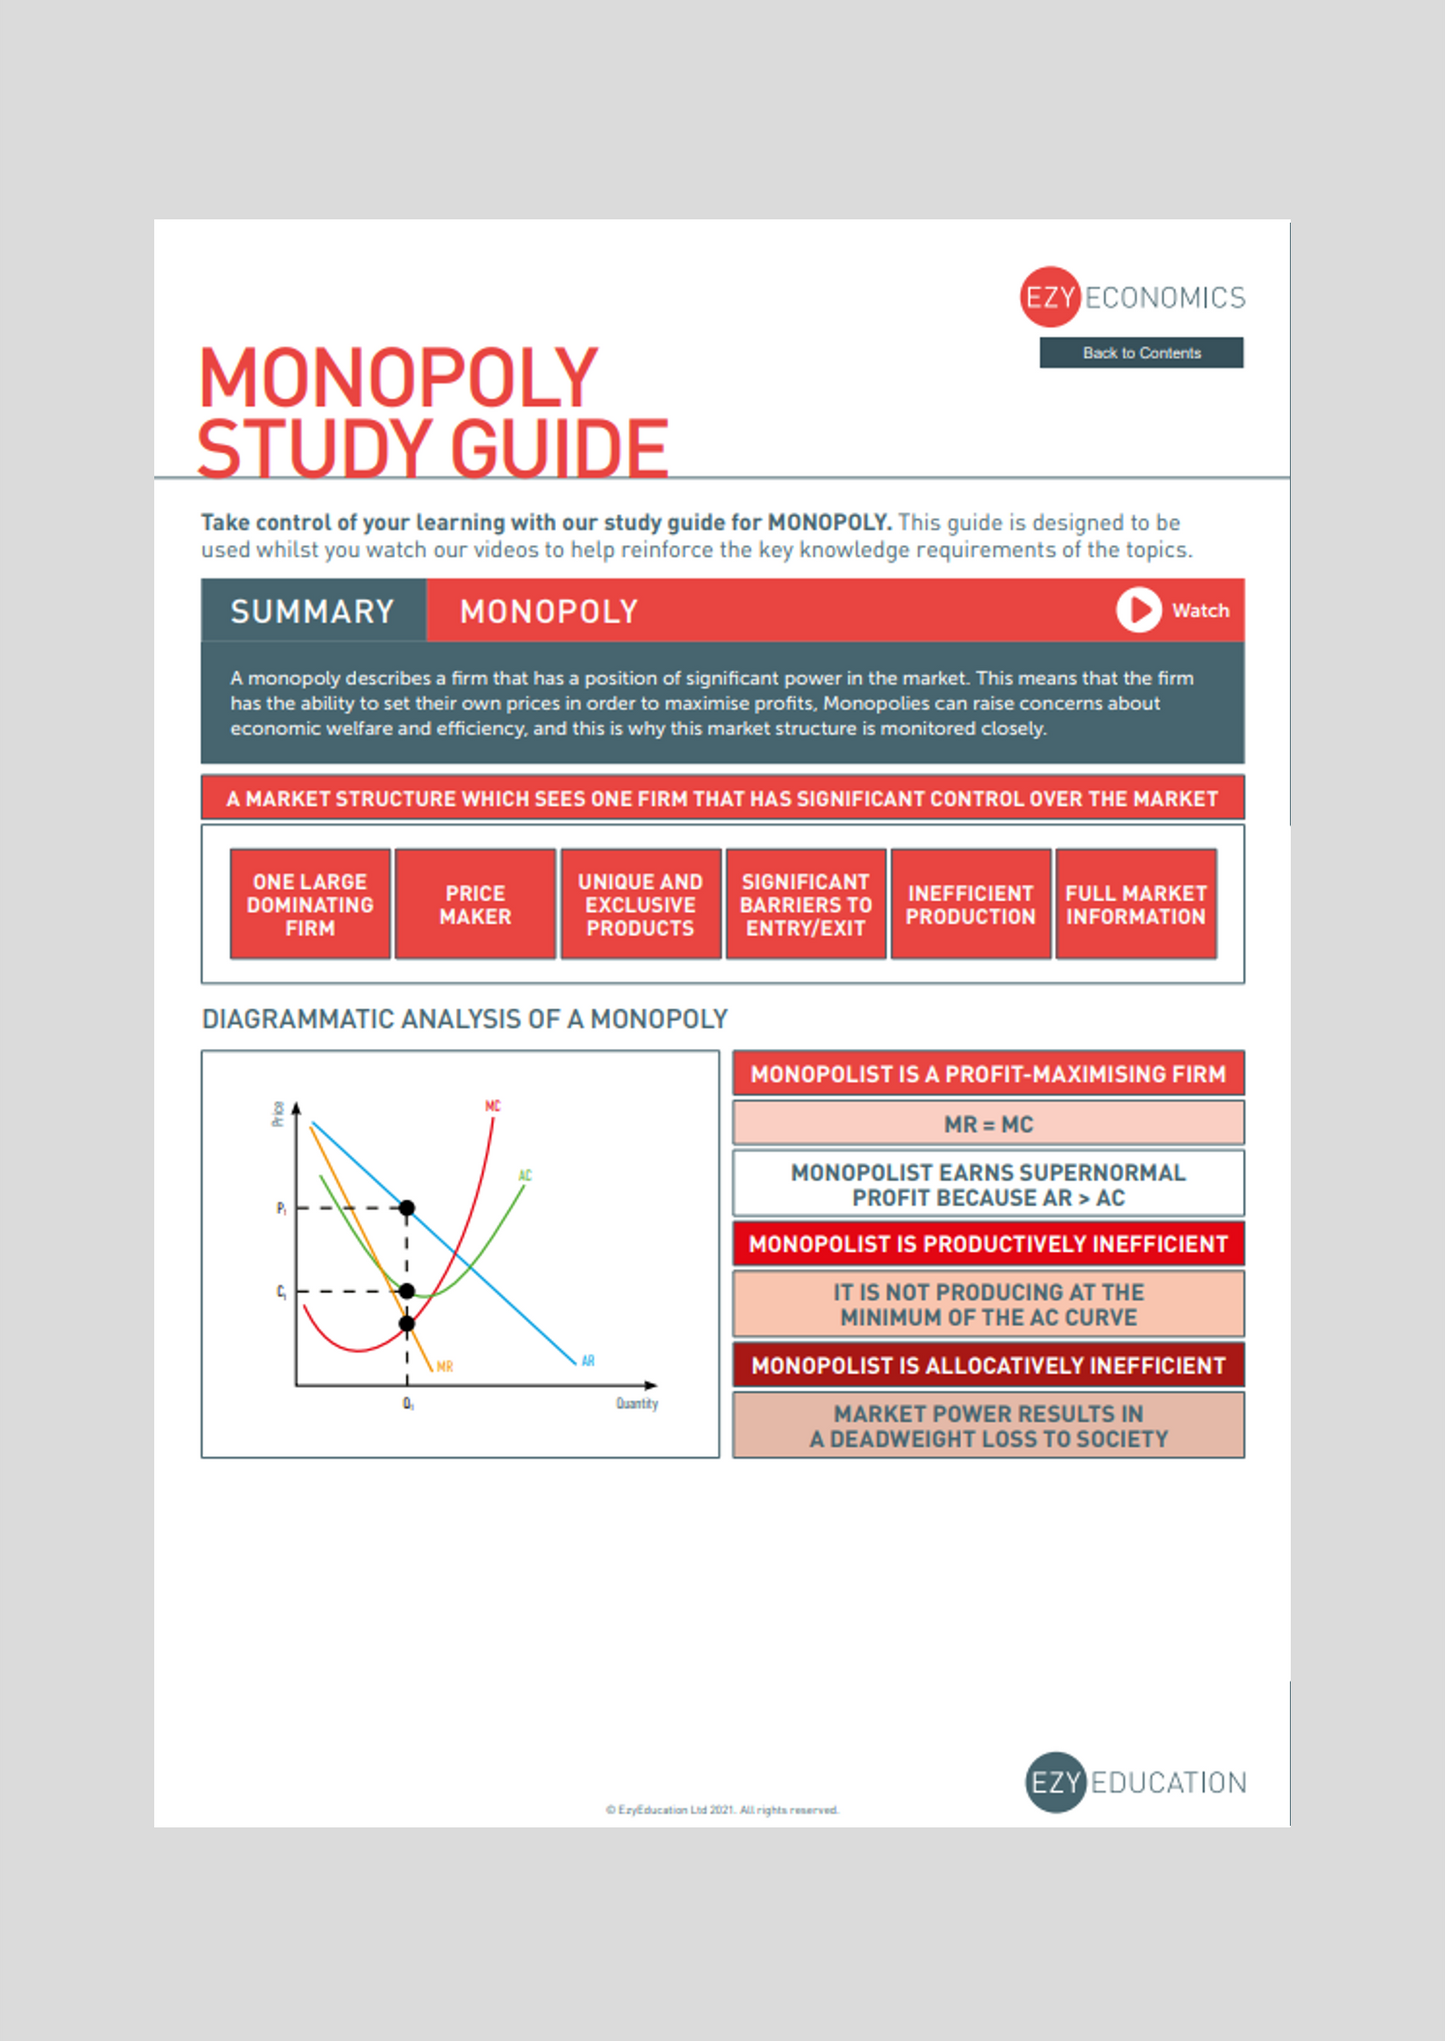 A-Level Microeconomics Study Guide - Module 7: Imperfectly Competitive Markets